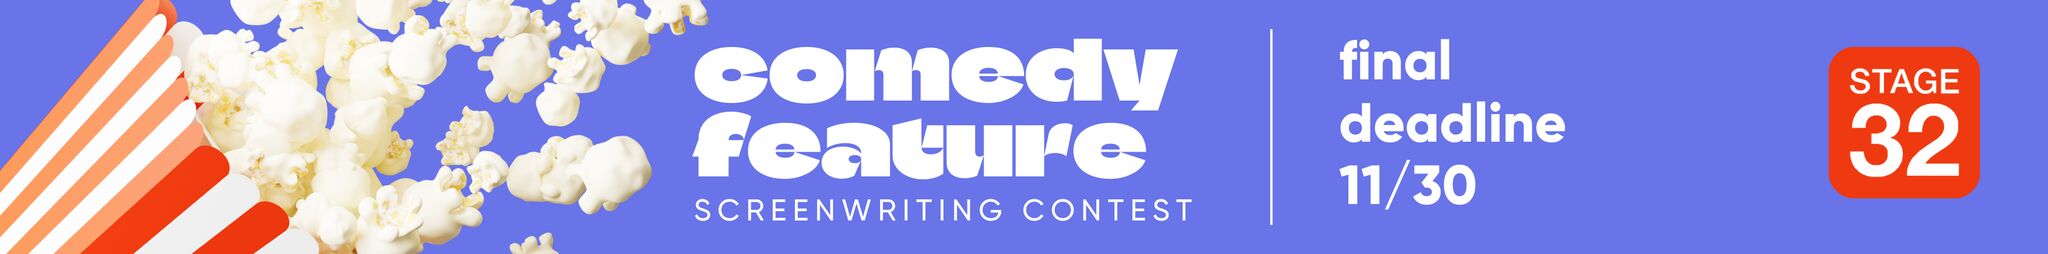 Feature Comedy Final